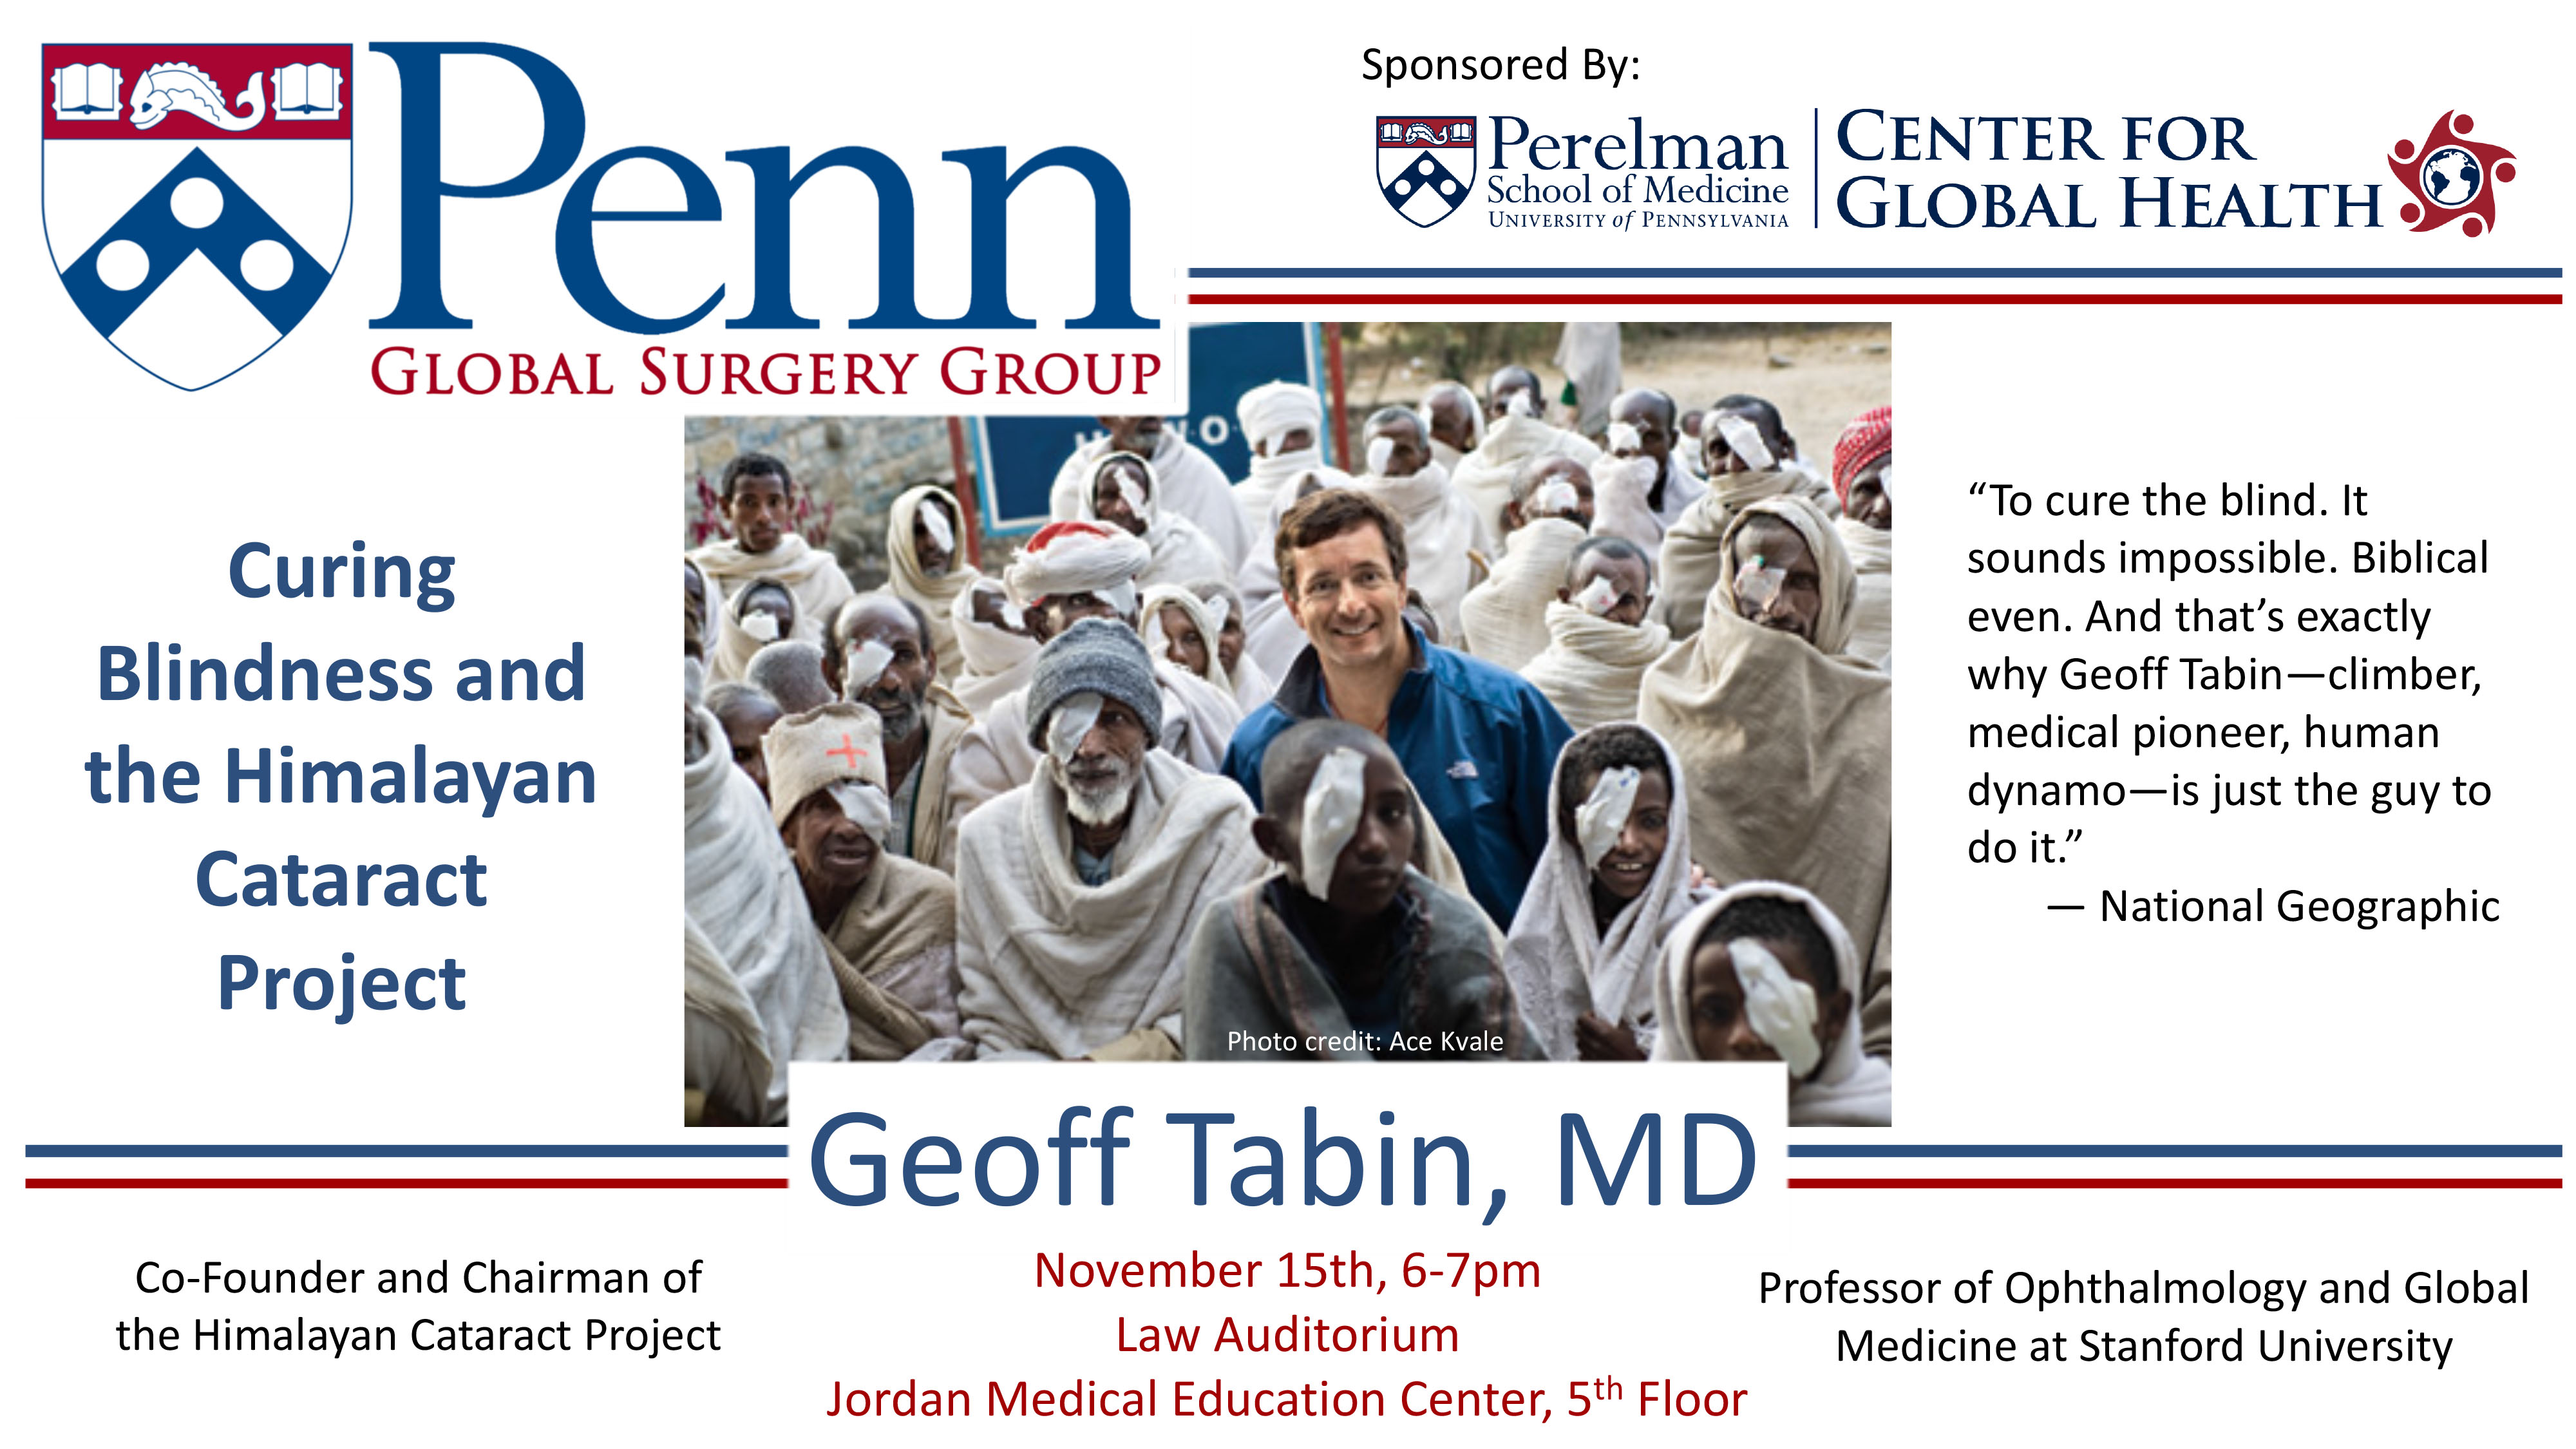 Dr. Tabin Event Flyer titled Curing Blindness and the Himalayan Cataract Project